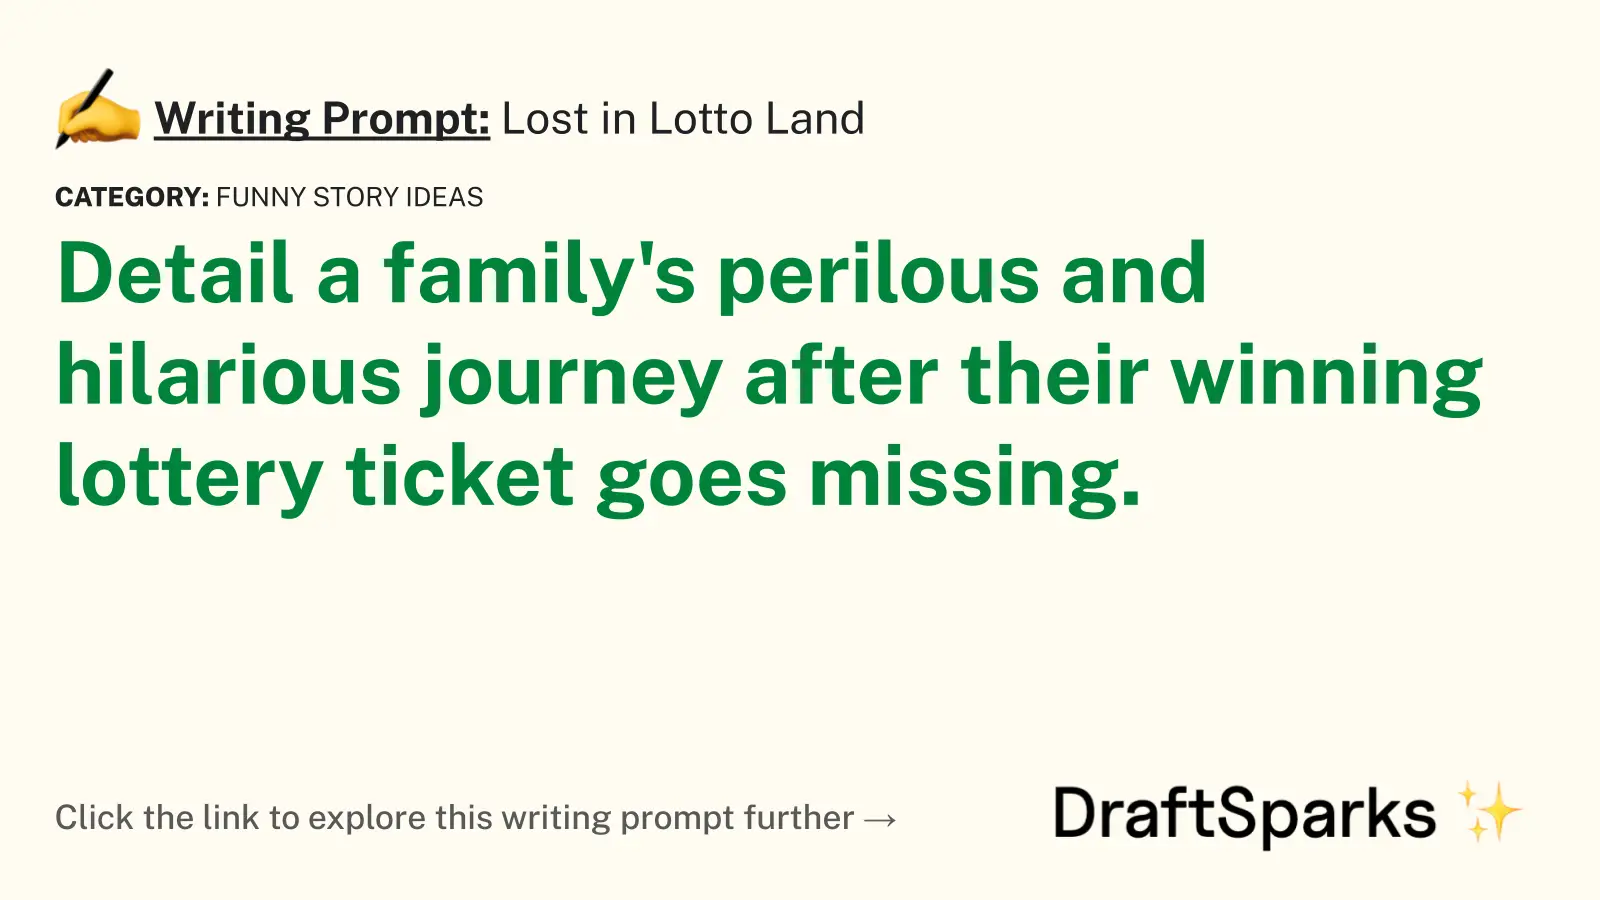 Lost in Lotto Land